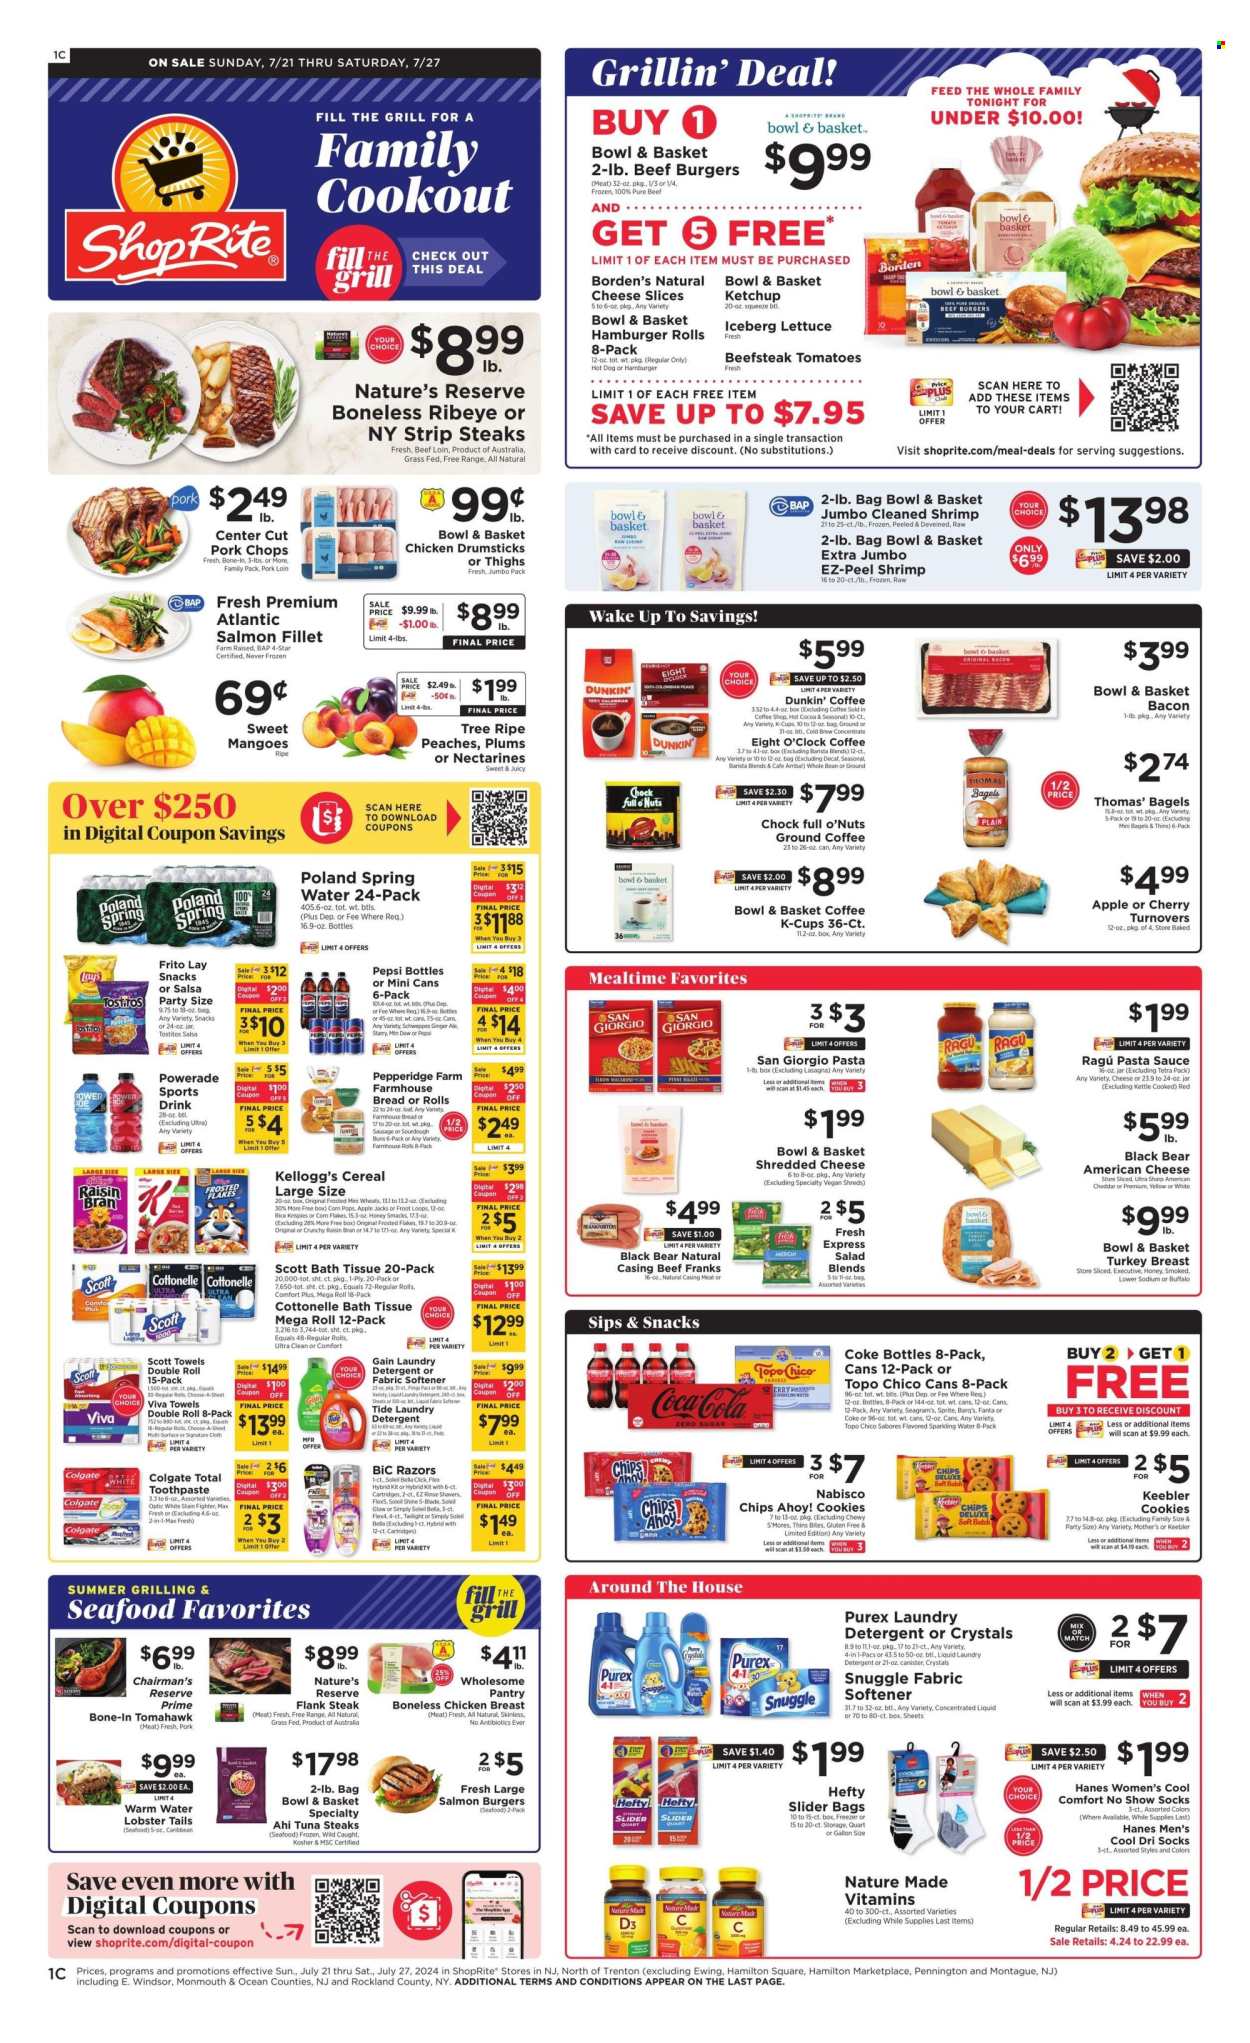 thumbnail - ShopRite Flyer - 07/21/2024 - 07/27/2024 - Sales products - electrolyte drink, kitchen towels, paper towels, detergent, laundry detergent, toothpaste, frankfurters, pasta sauce, spaghetti sauce, sauce, tomahawk steak, beef meat, beef steak, steak, ribeye steak, pork chops, pork meat, seafood, shrimps, peaches, plums, coffee, bagels, bottled water, water, cereals, bath tissue, pasta, Coca-Cola, soft drink, Coke, cookies, Snuggle, fabric softener, american cheese, cheese, Pepsi, carbonated soft drink, Bowl & Basket, tuna, tuna steak, fish steak, lobster, lobster tail, snack, salsa, ketchup, hamburger, beef burger, sliced cheese, lettuce, striploin steak, dinner rolls, burger buns, sandwich rolls, chicken thighs, chicken drumsticks, chicken, fish fillets, salmon, salmon fillet, tomatoes, Eight O'Clock, ground coffee, mango, nectarines, bacon, coffee capsules, K-Cups, turnovers, bread, razor, shredded cheese, salad greens, salad, dietary supplement, vitamins, socks, no-show socks, bag, storage bag, turkey breast, chicken breasts, fish burger, flank steak. Page 1.